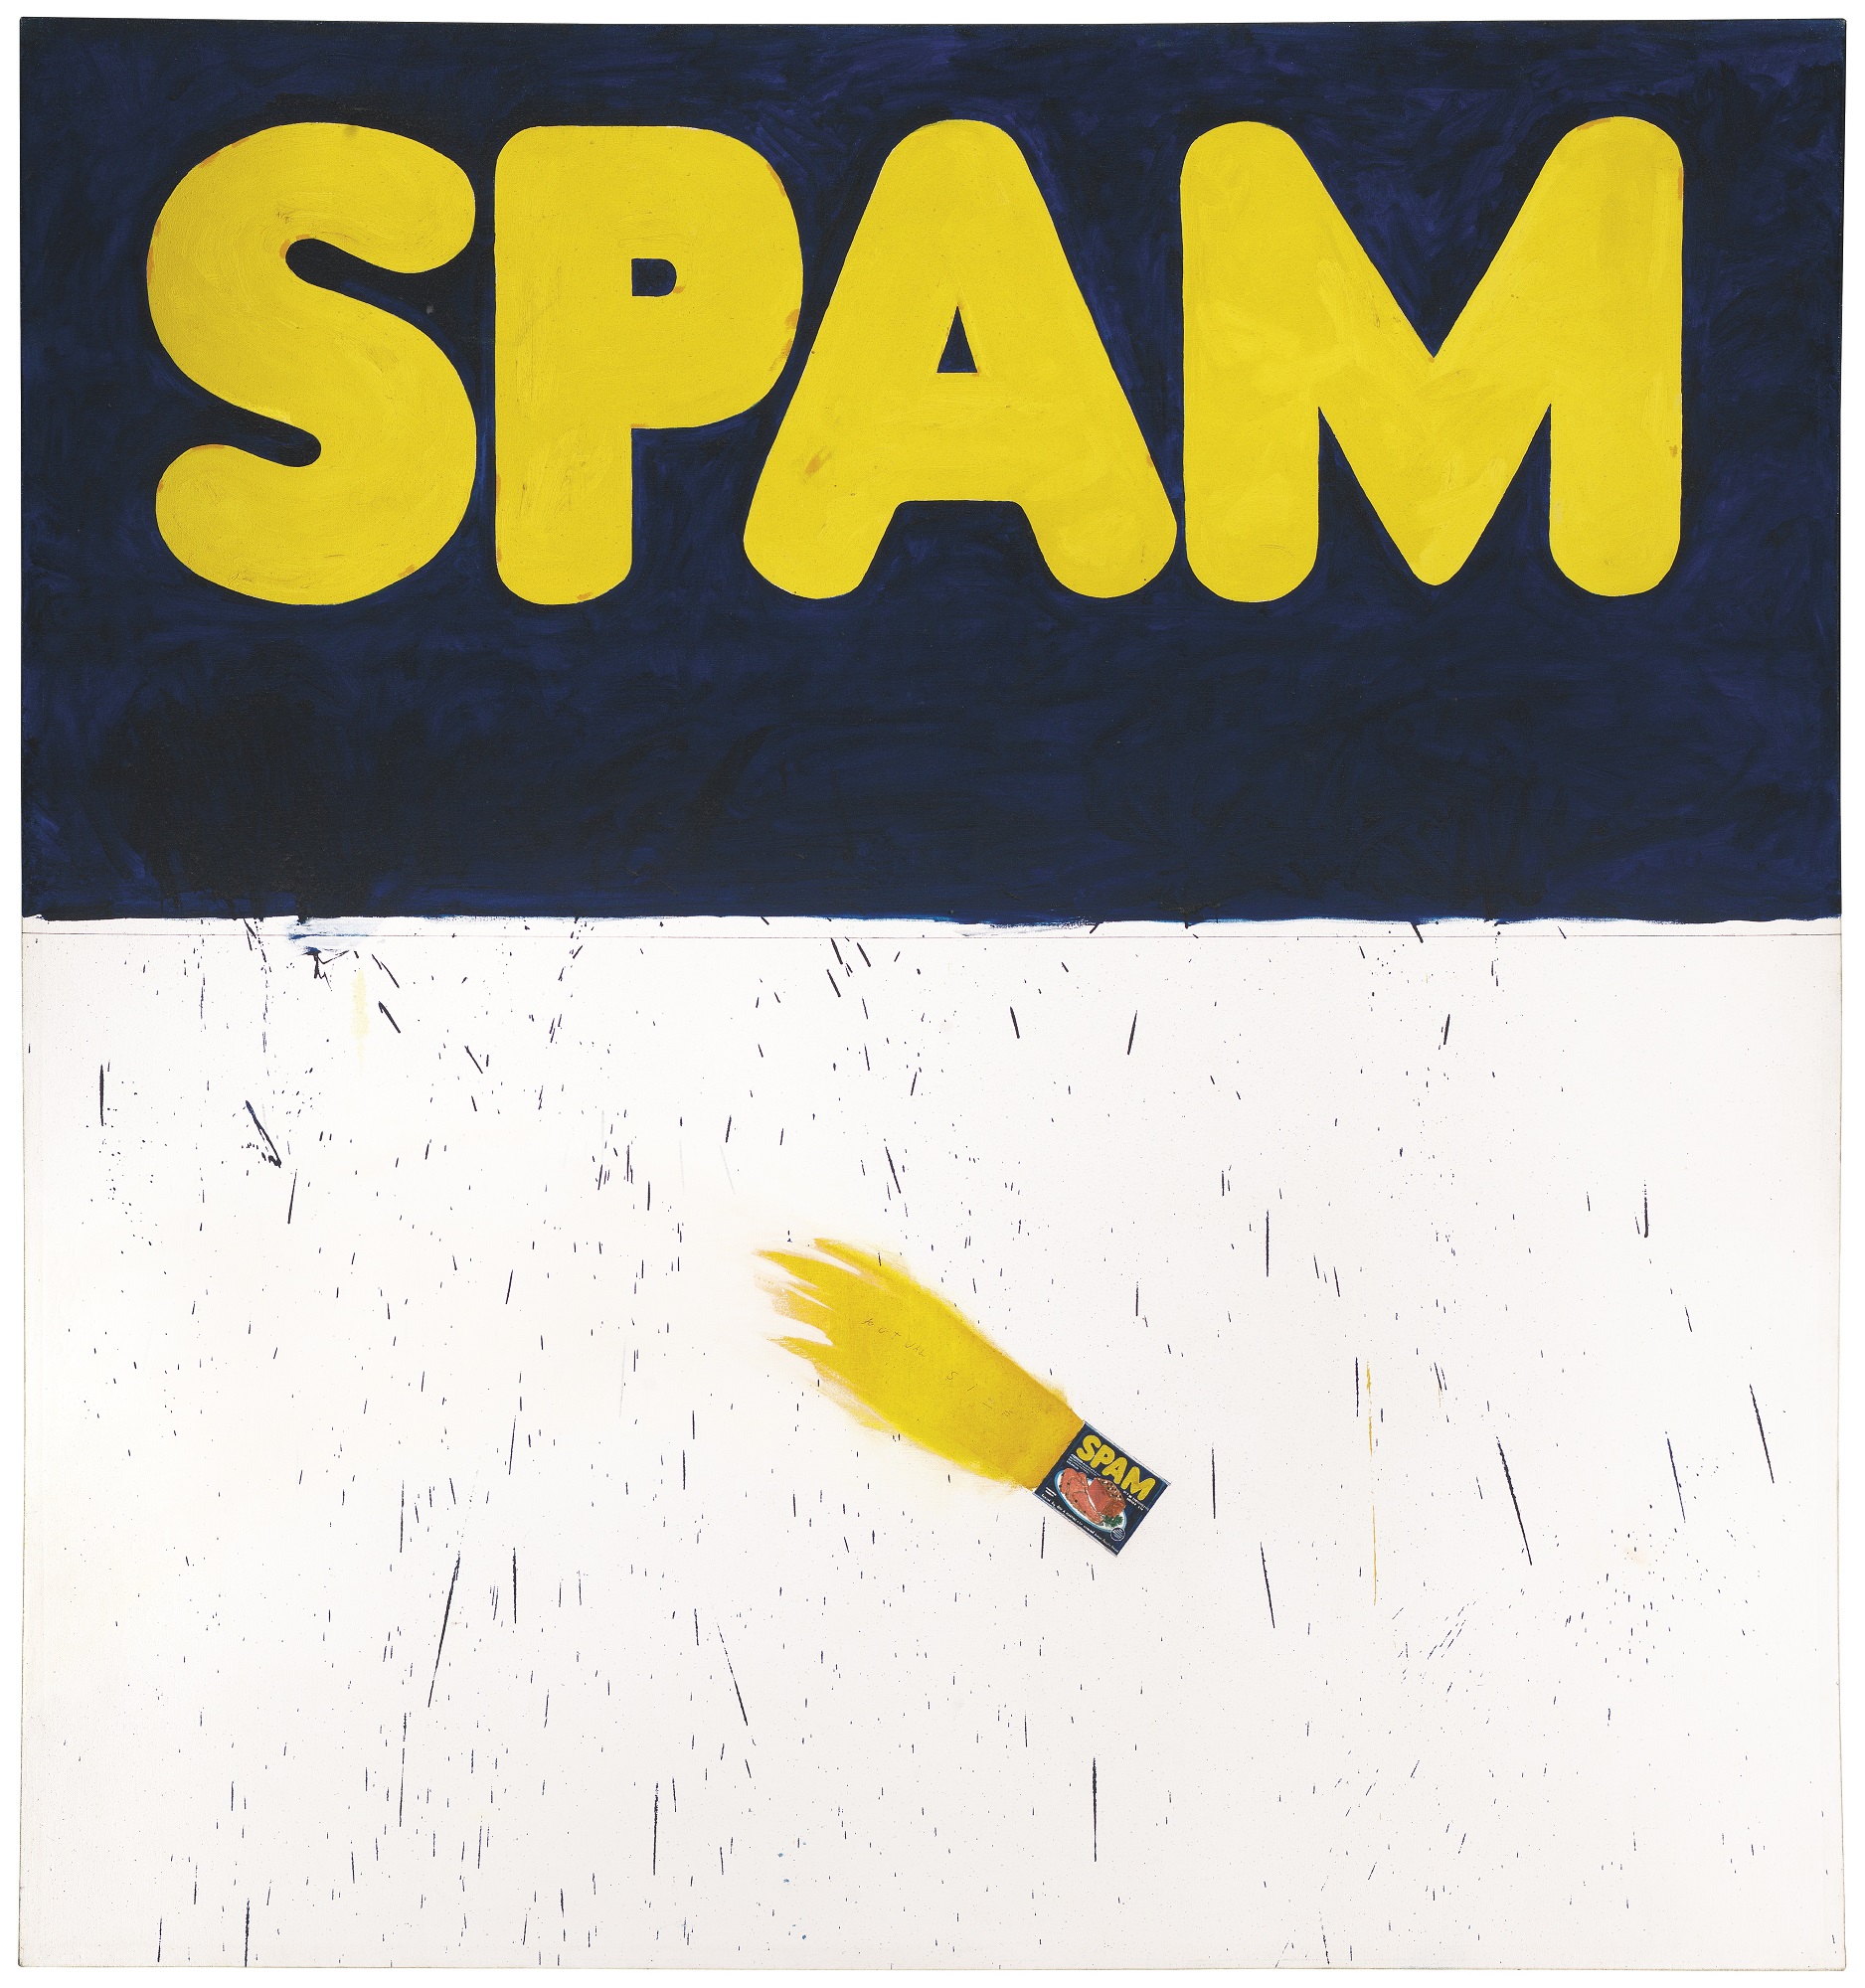 Actual Size; painting by Ed Ruscha